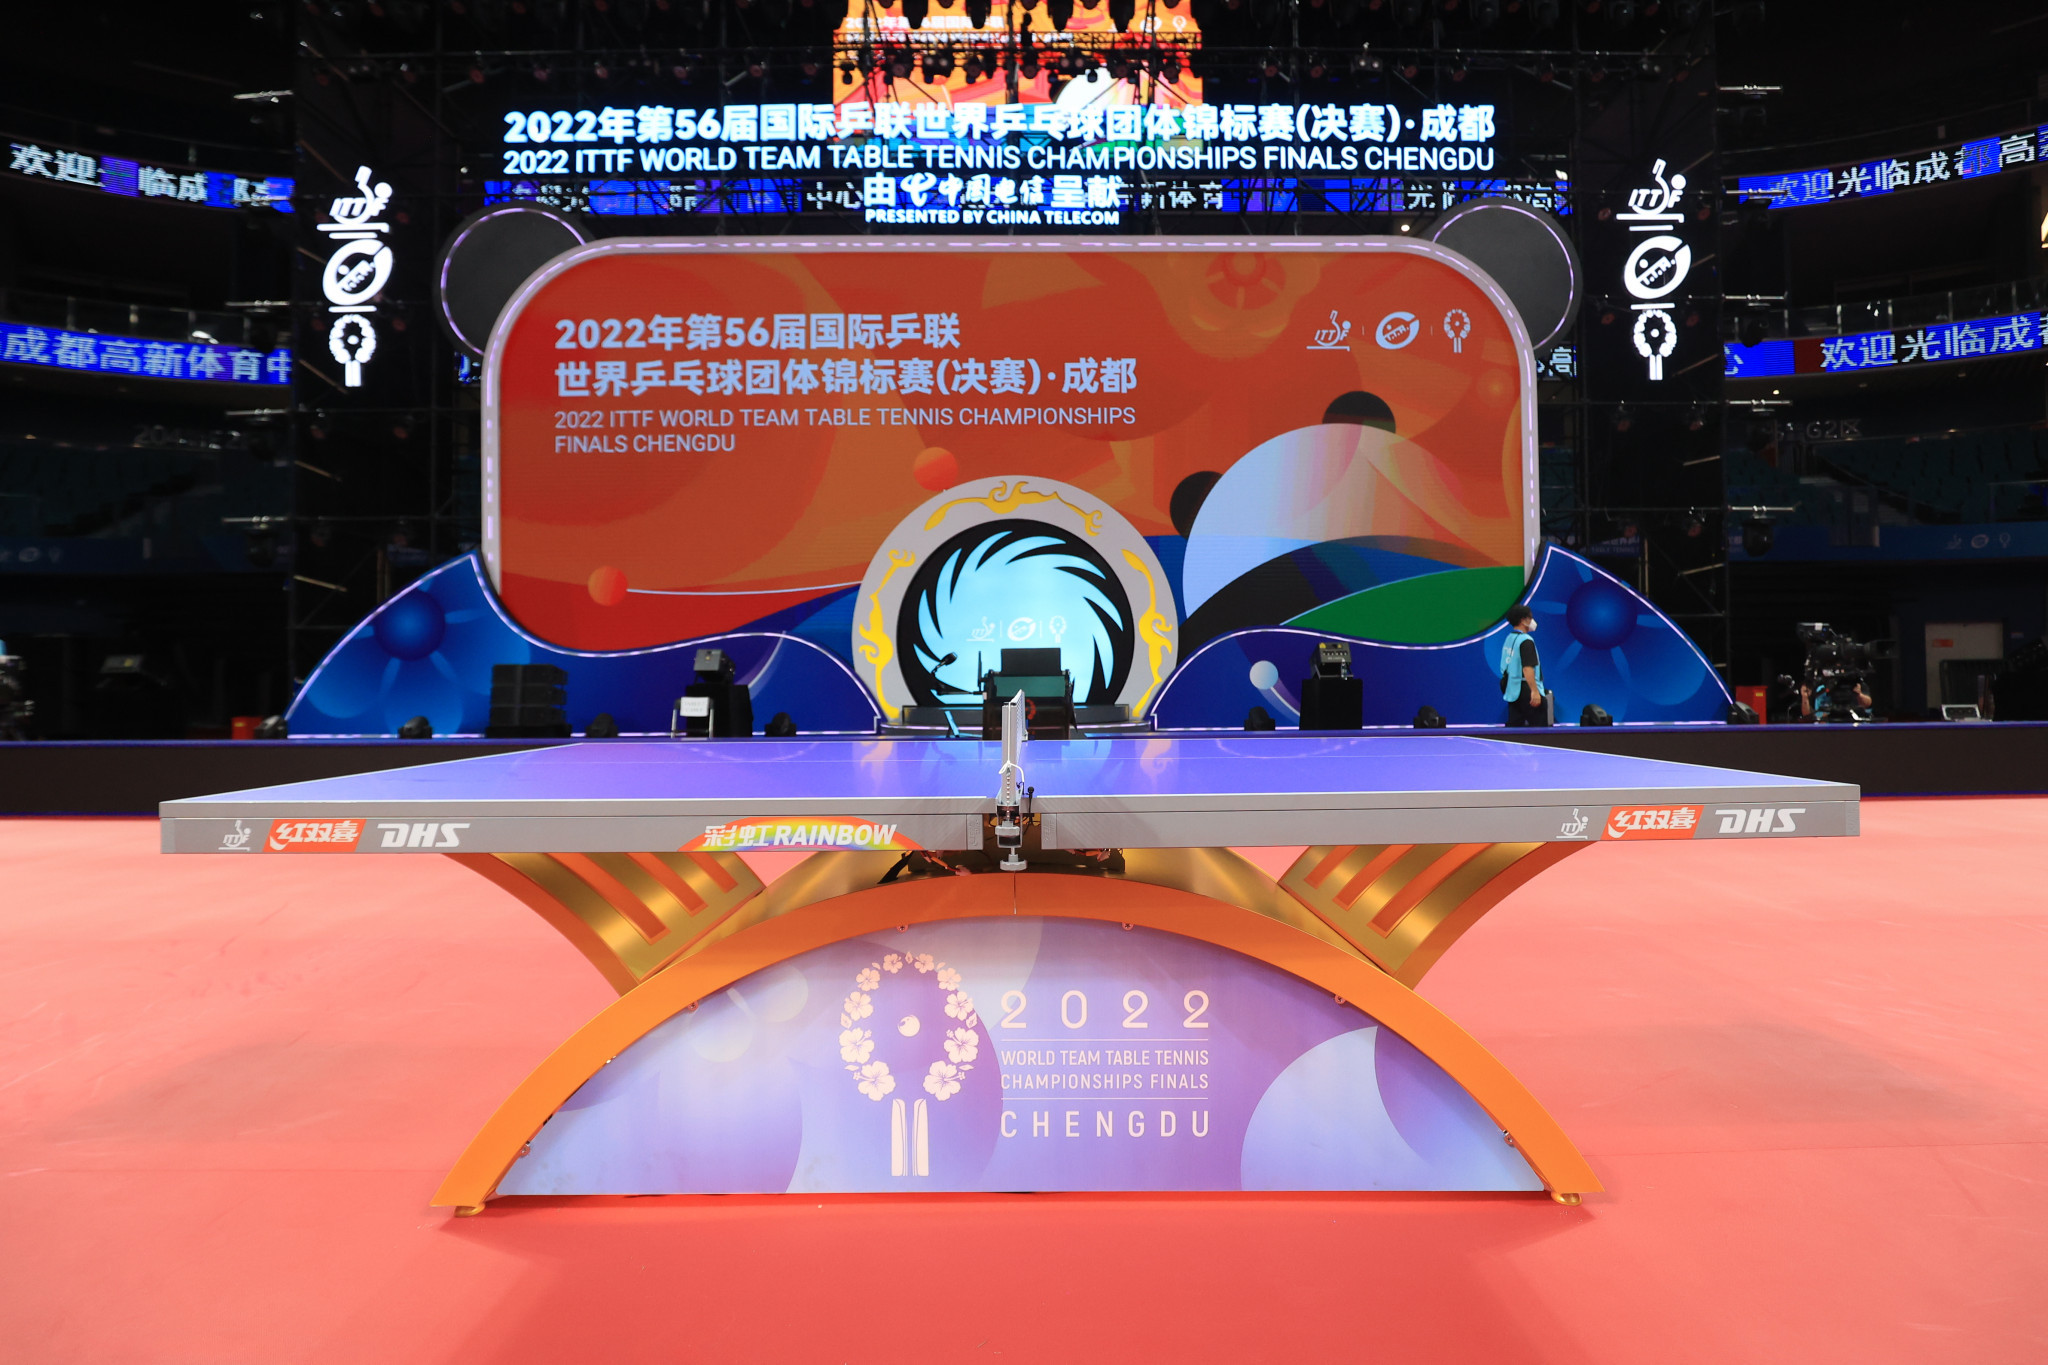 More than 250 athletes are living in a closed-loop system like the one used for Beijing 2022 ©ITTF